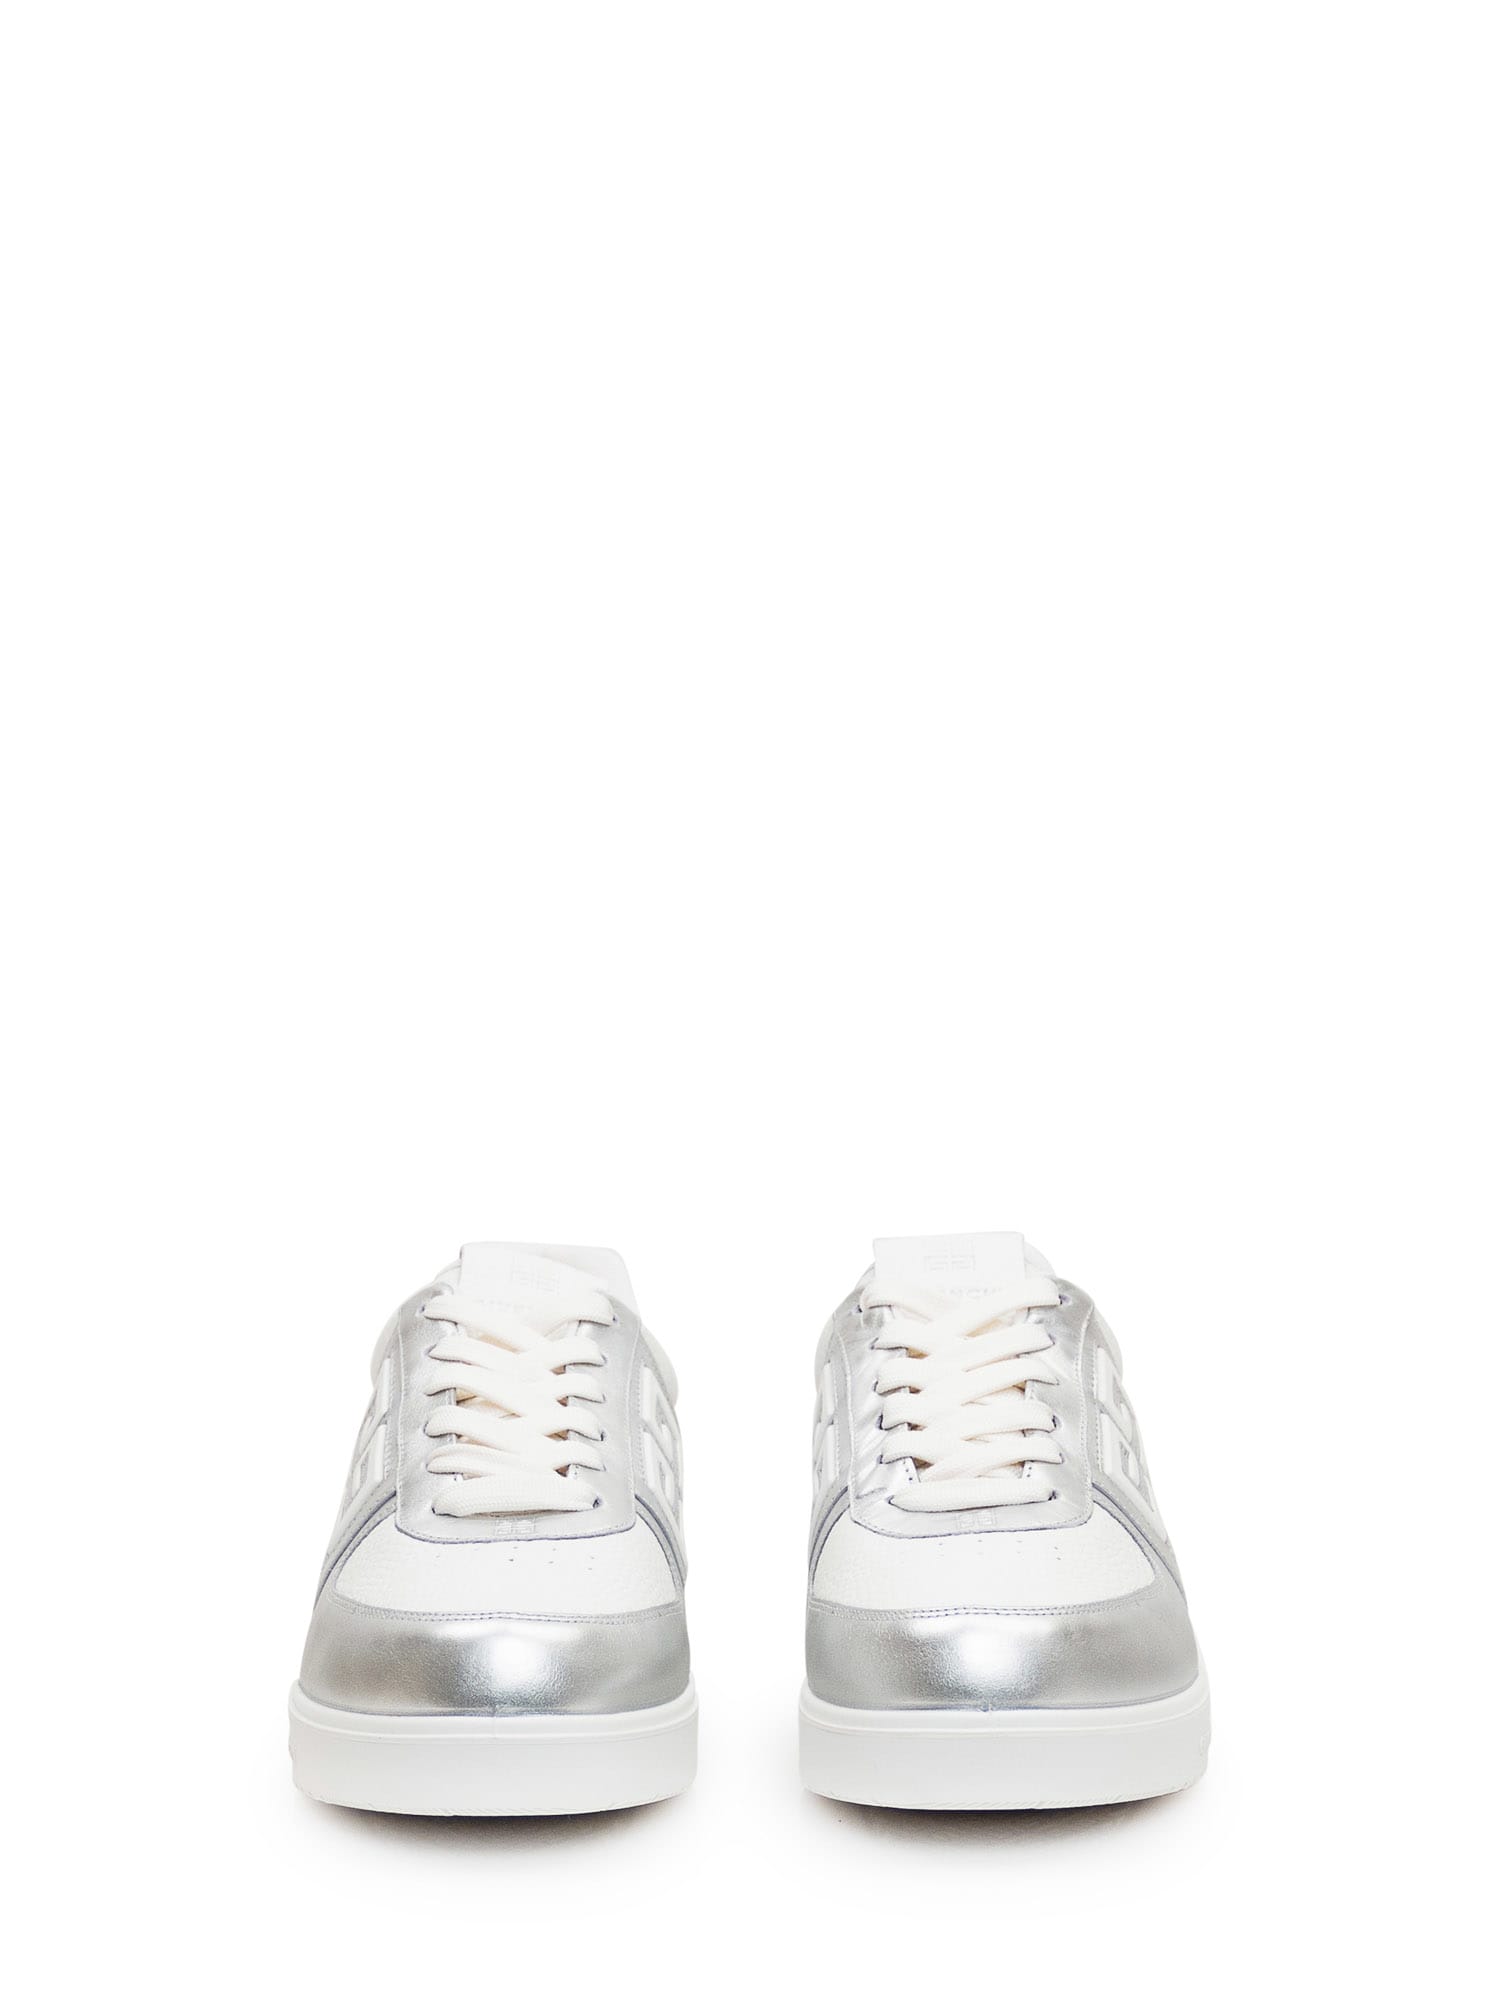 Shop Givenchy G4 Low-top Sneaker In Silvery